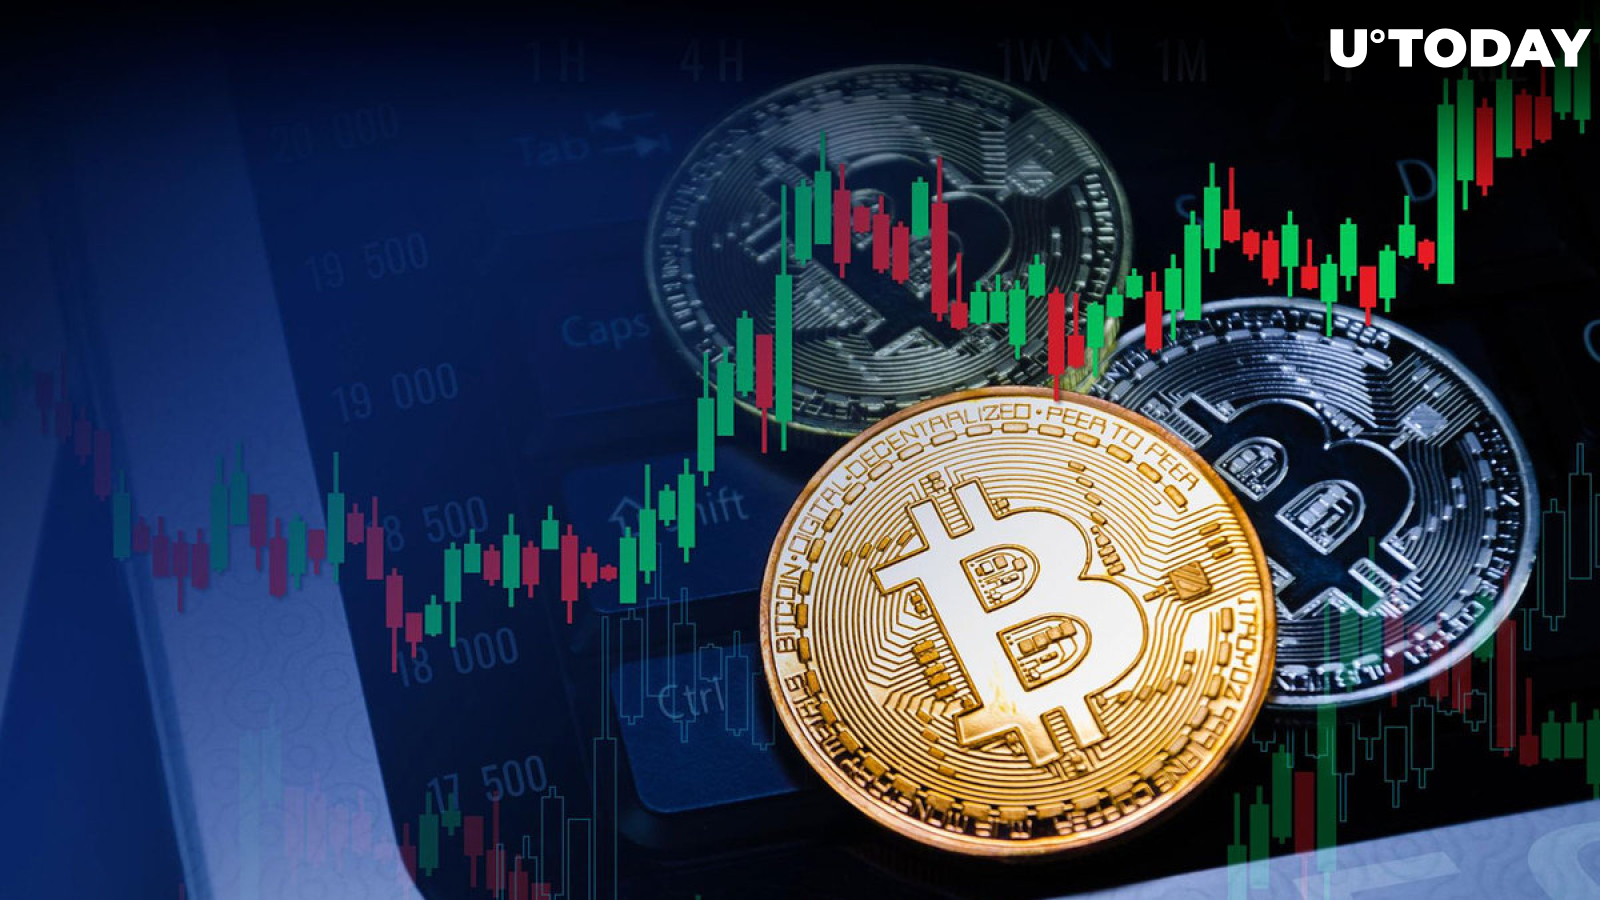 Bitcoin (BTC) Prints Key Short-term Signal, Here's What to Pay Attention To